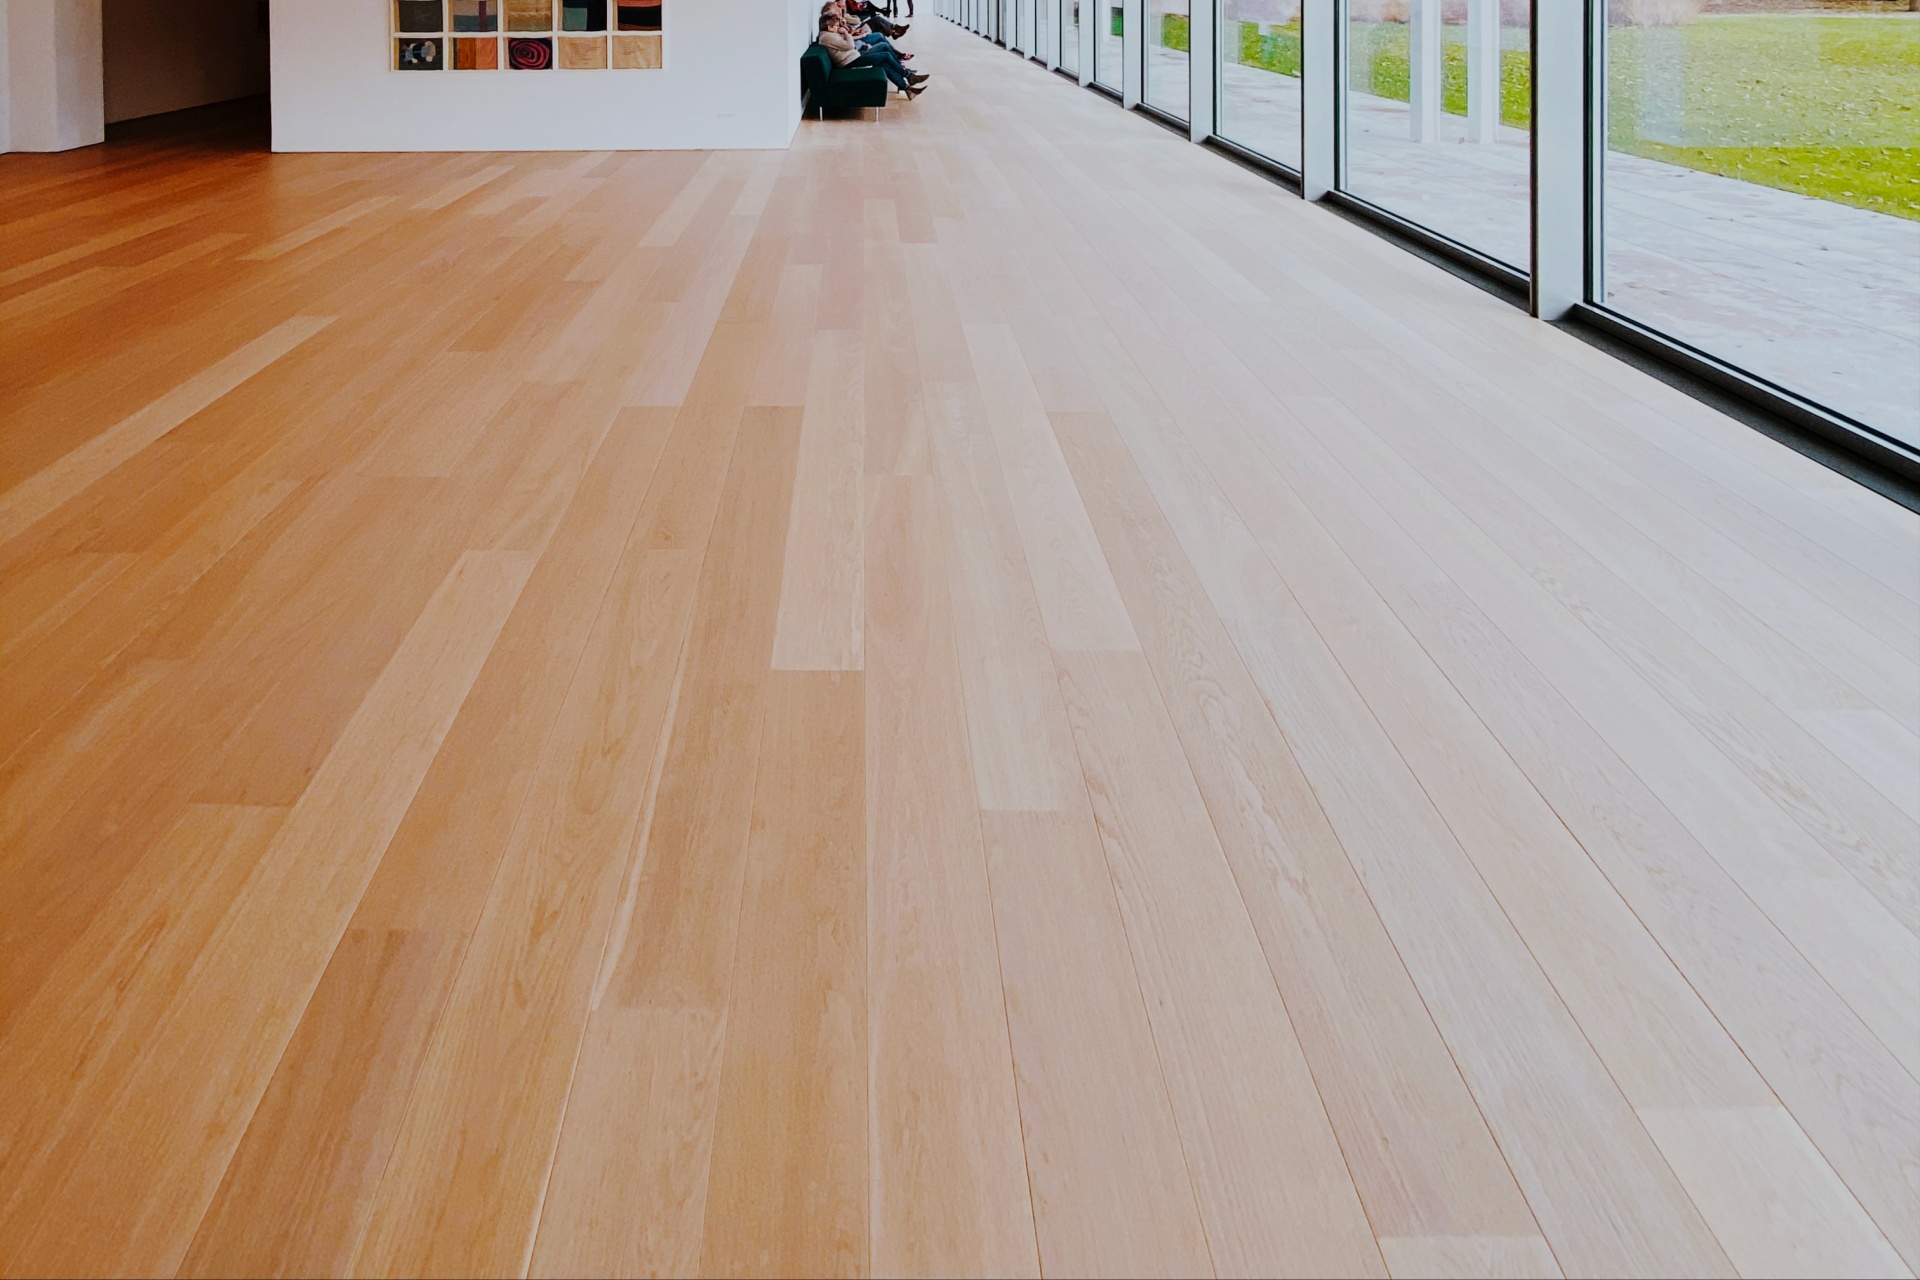 What To Know Before Installing Laminate Flooring